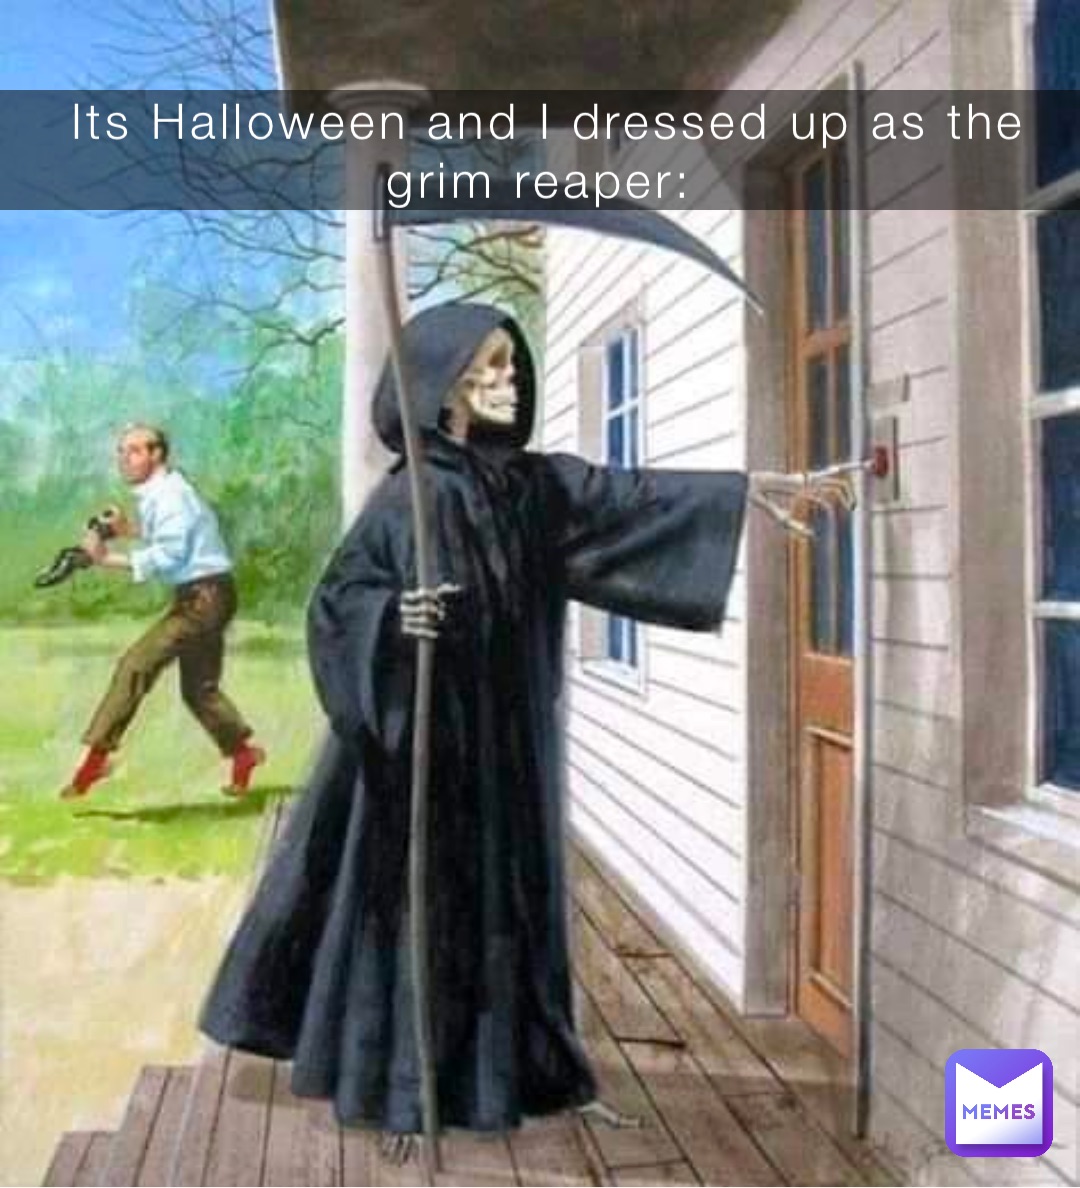 Its Halloween and I dressed up as the grim reaper: